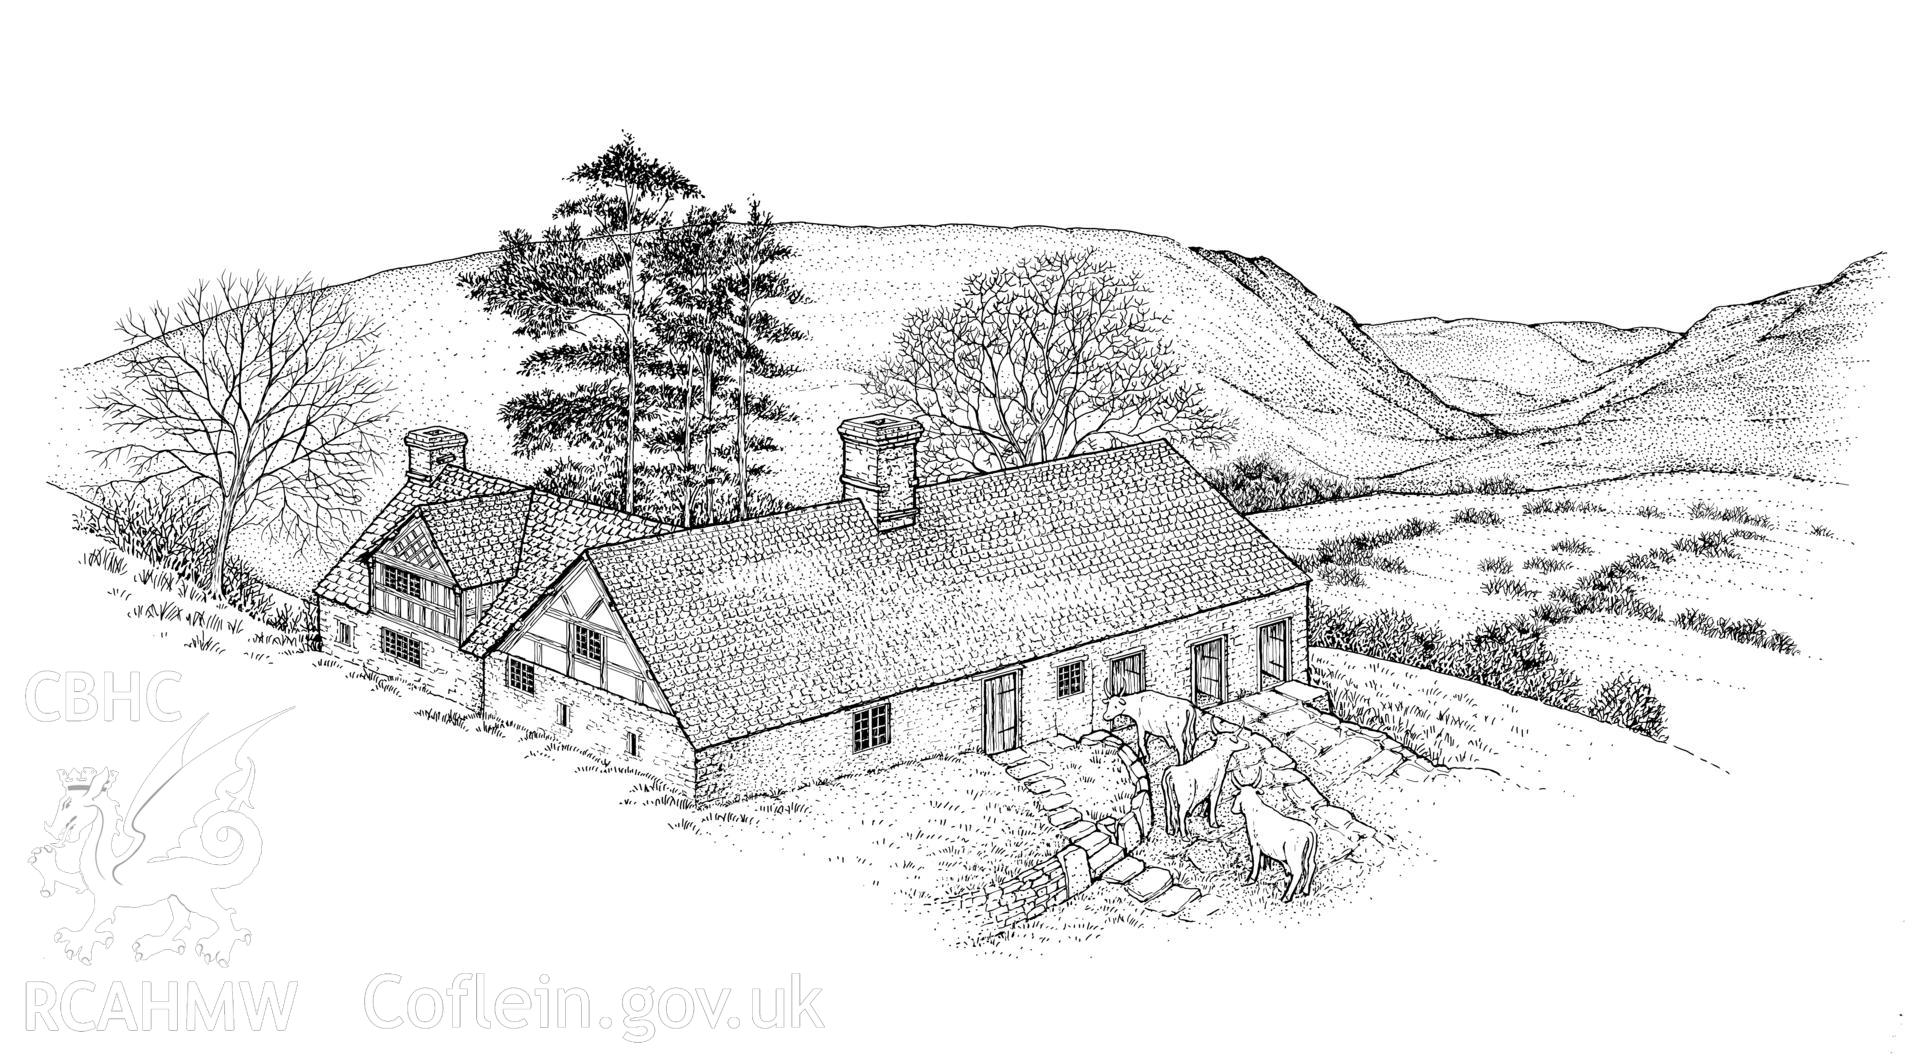 Gilfach Farmhouse, St Harmon; perspective sketch by Jane Durrant showing the longhouse and added parlour cross-wing, as published in the RCAHMW volume, Houses and History in the Marches of Wales.  Radnorshire 1400-1800,  page 206, figure 218.